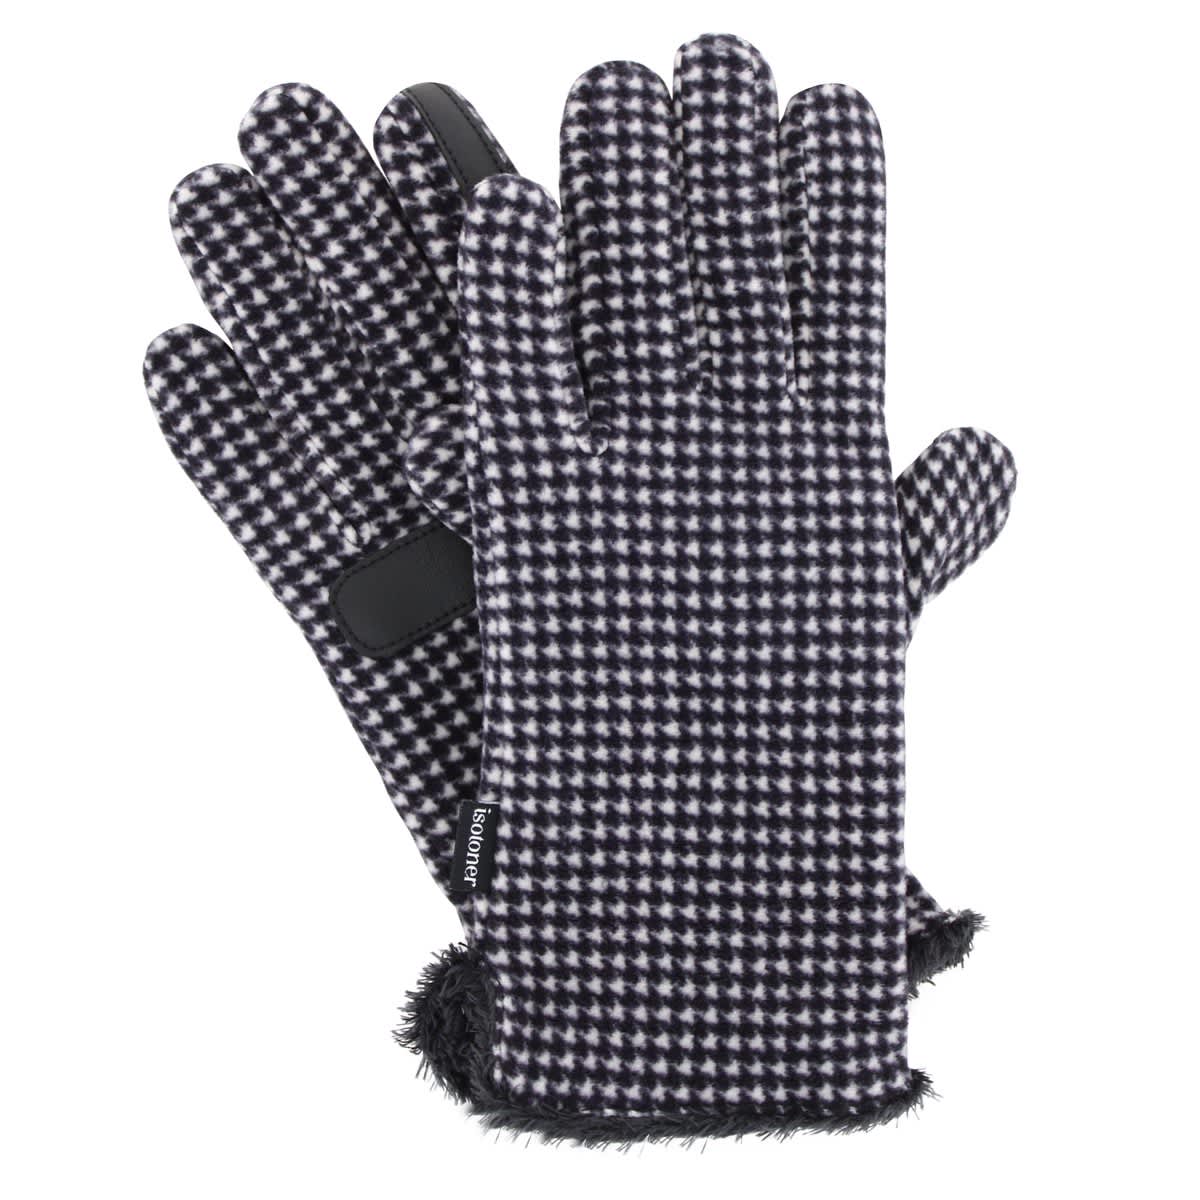 Gants Tactiles Polaire Recyclée Rouge - Isotoner Reference : 16979